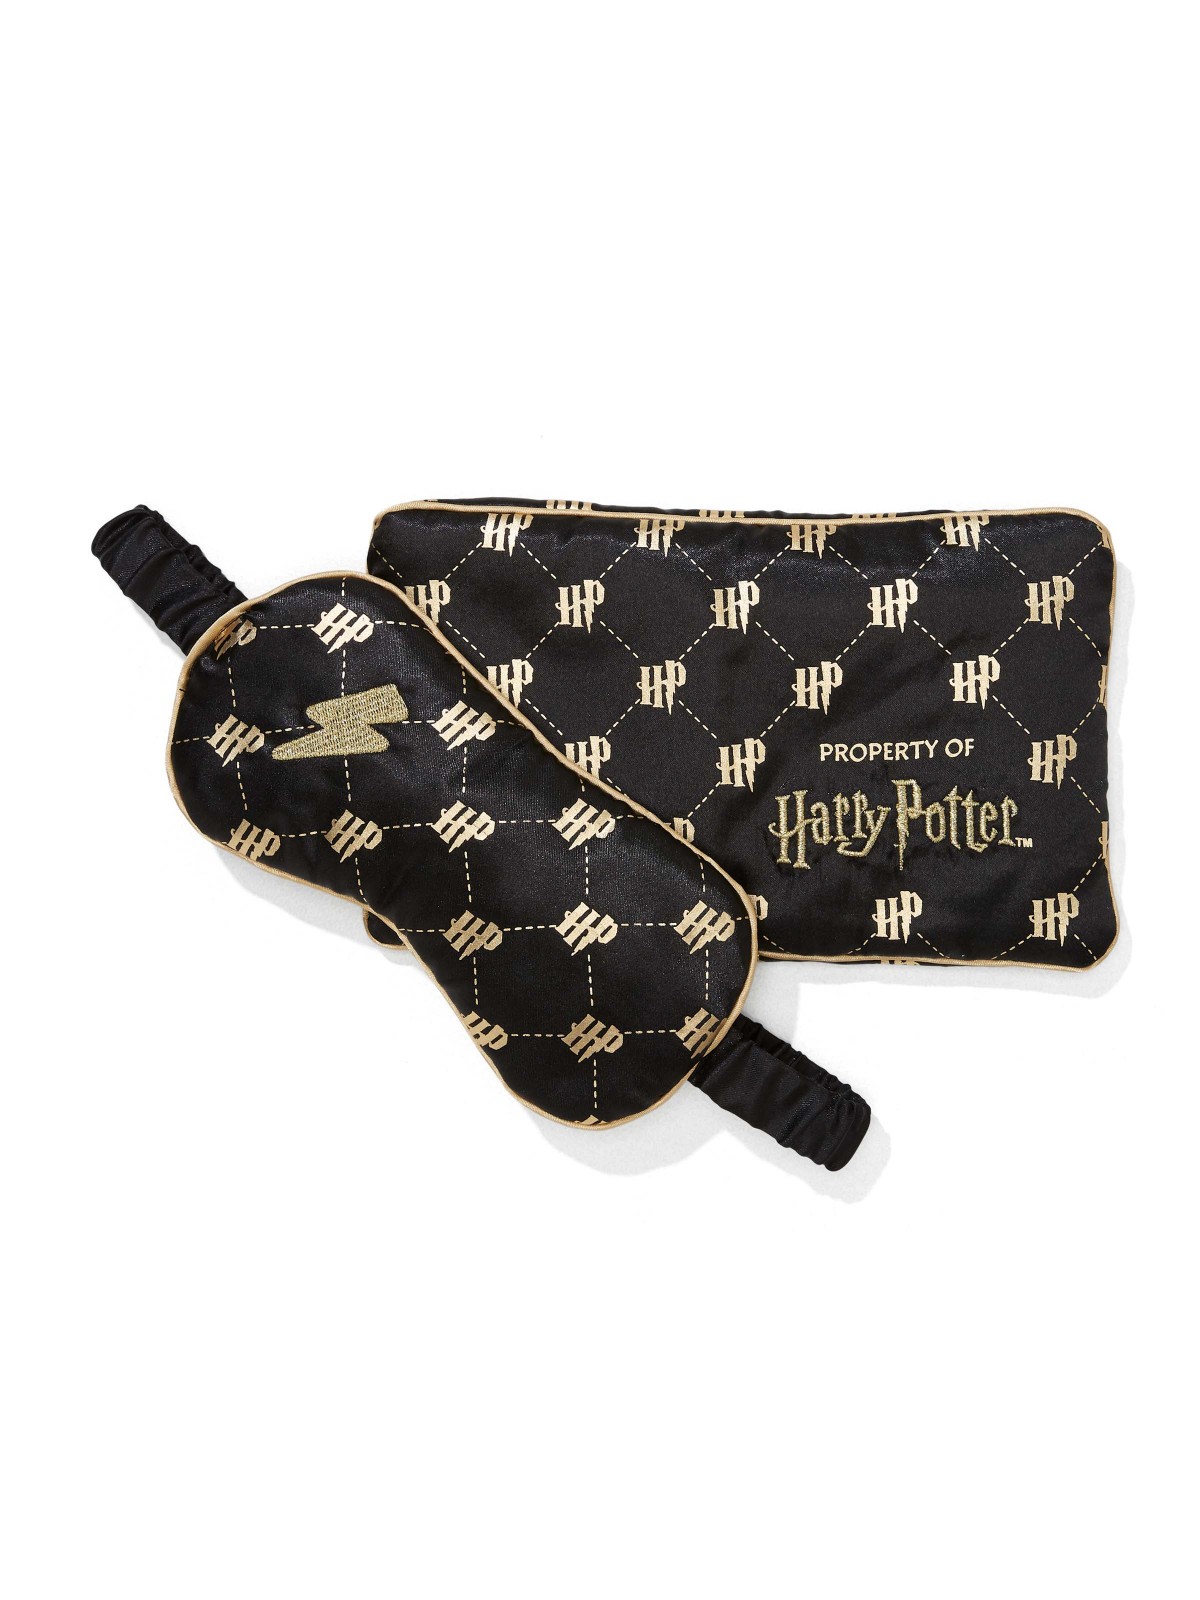 Peter Alexander eye mask and pouch